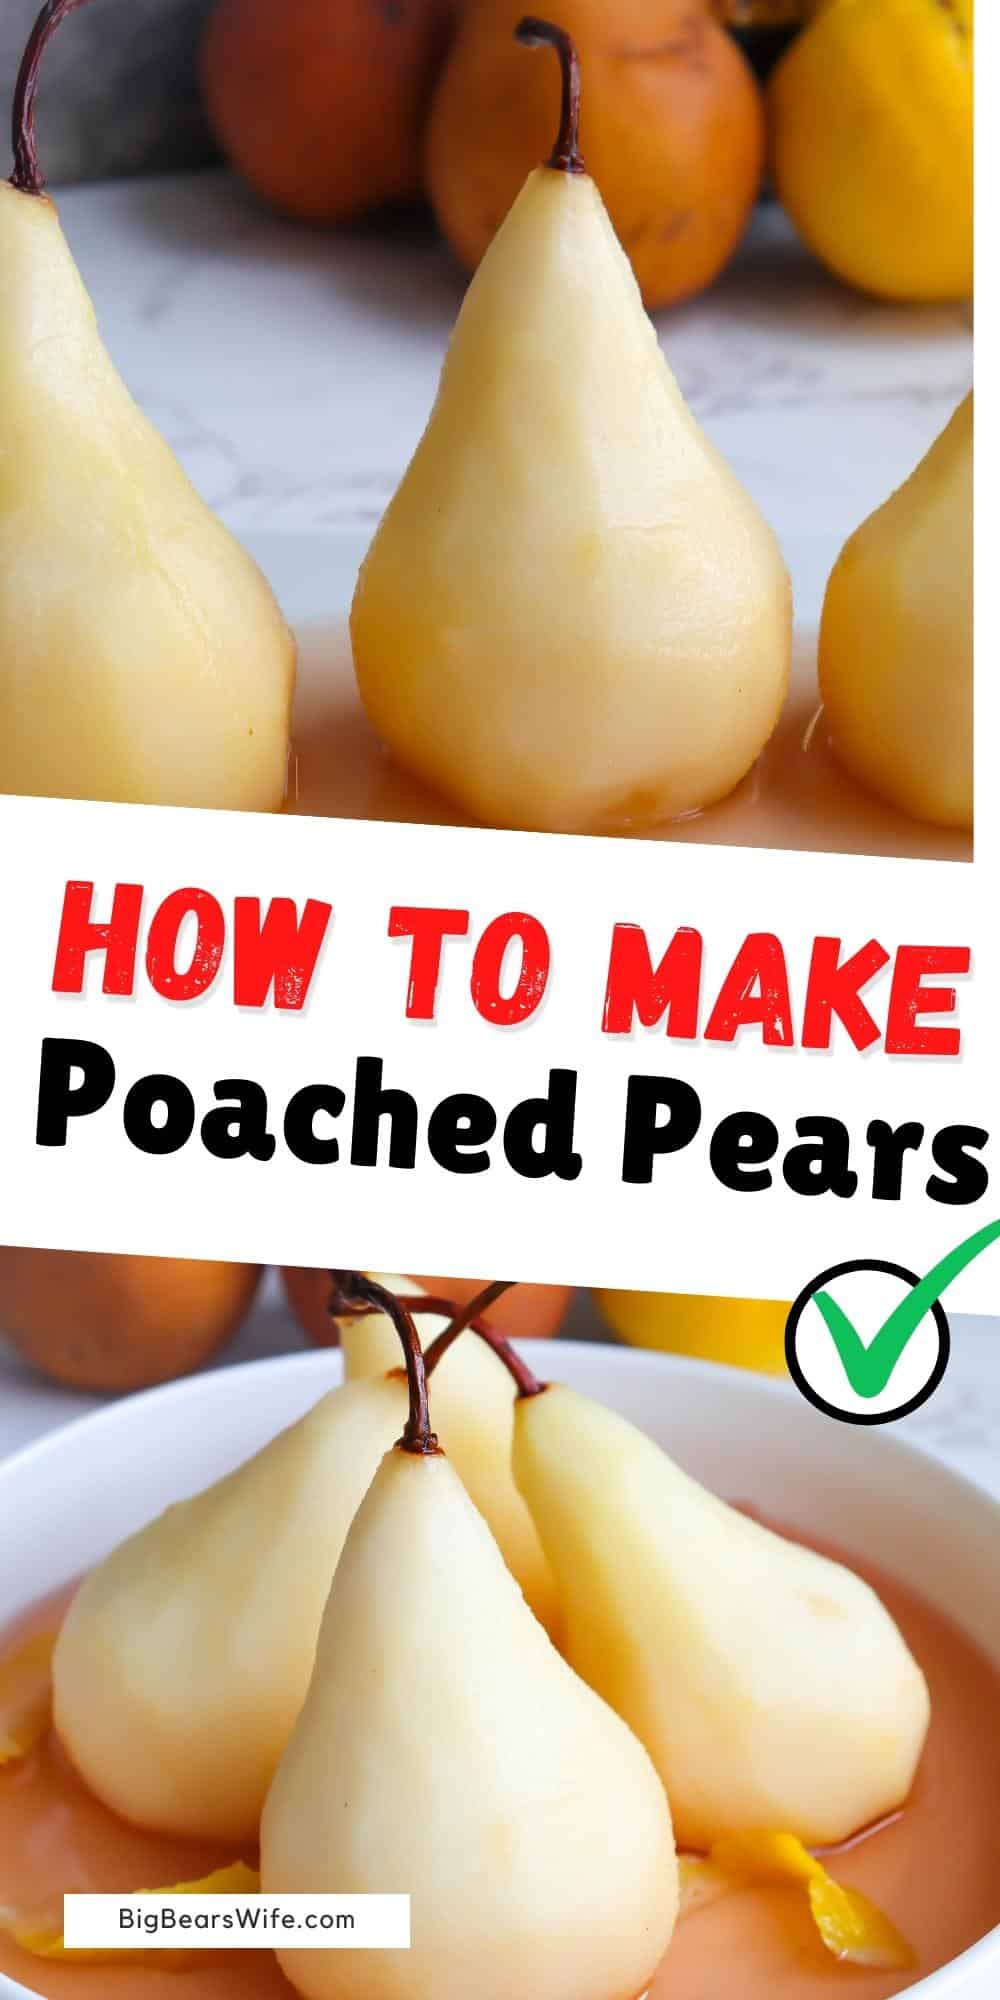 These poached pears are so easy to make and perfect when served with vanilla ice cream, homemade whipped cream or an Espresso! This recipe calls for Bosc pears specifically, as they hold their shape well when poached. This vintage recipe first appeared in the 1986 edition of Homemade Good News Cookbook. via @bigbearswife